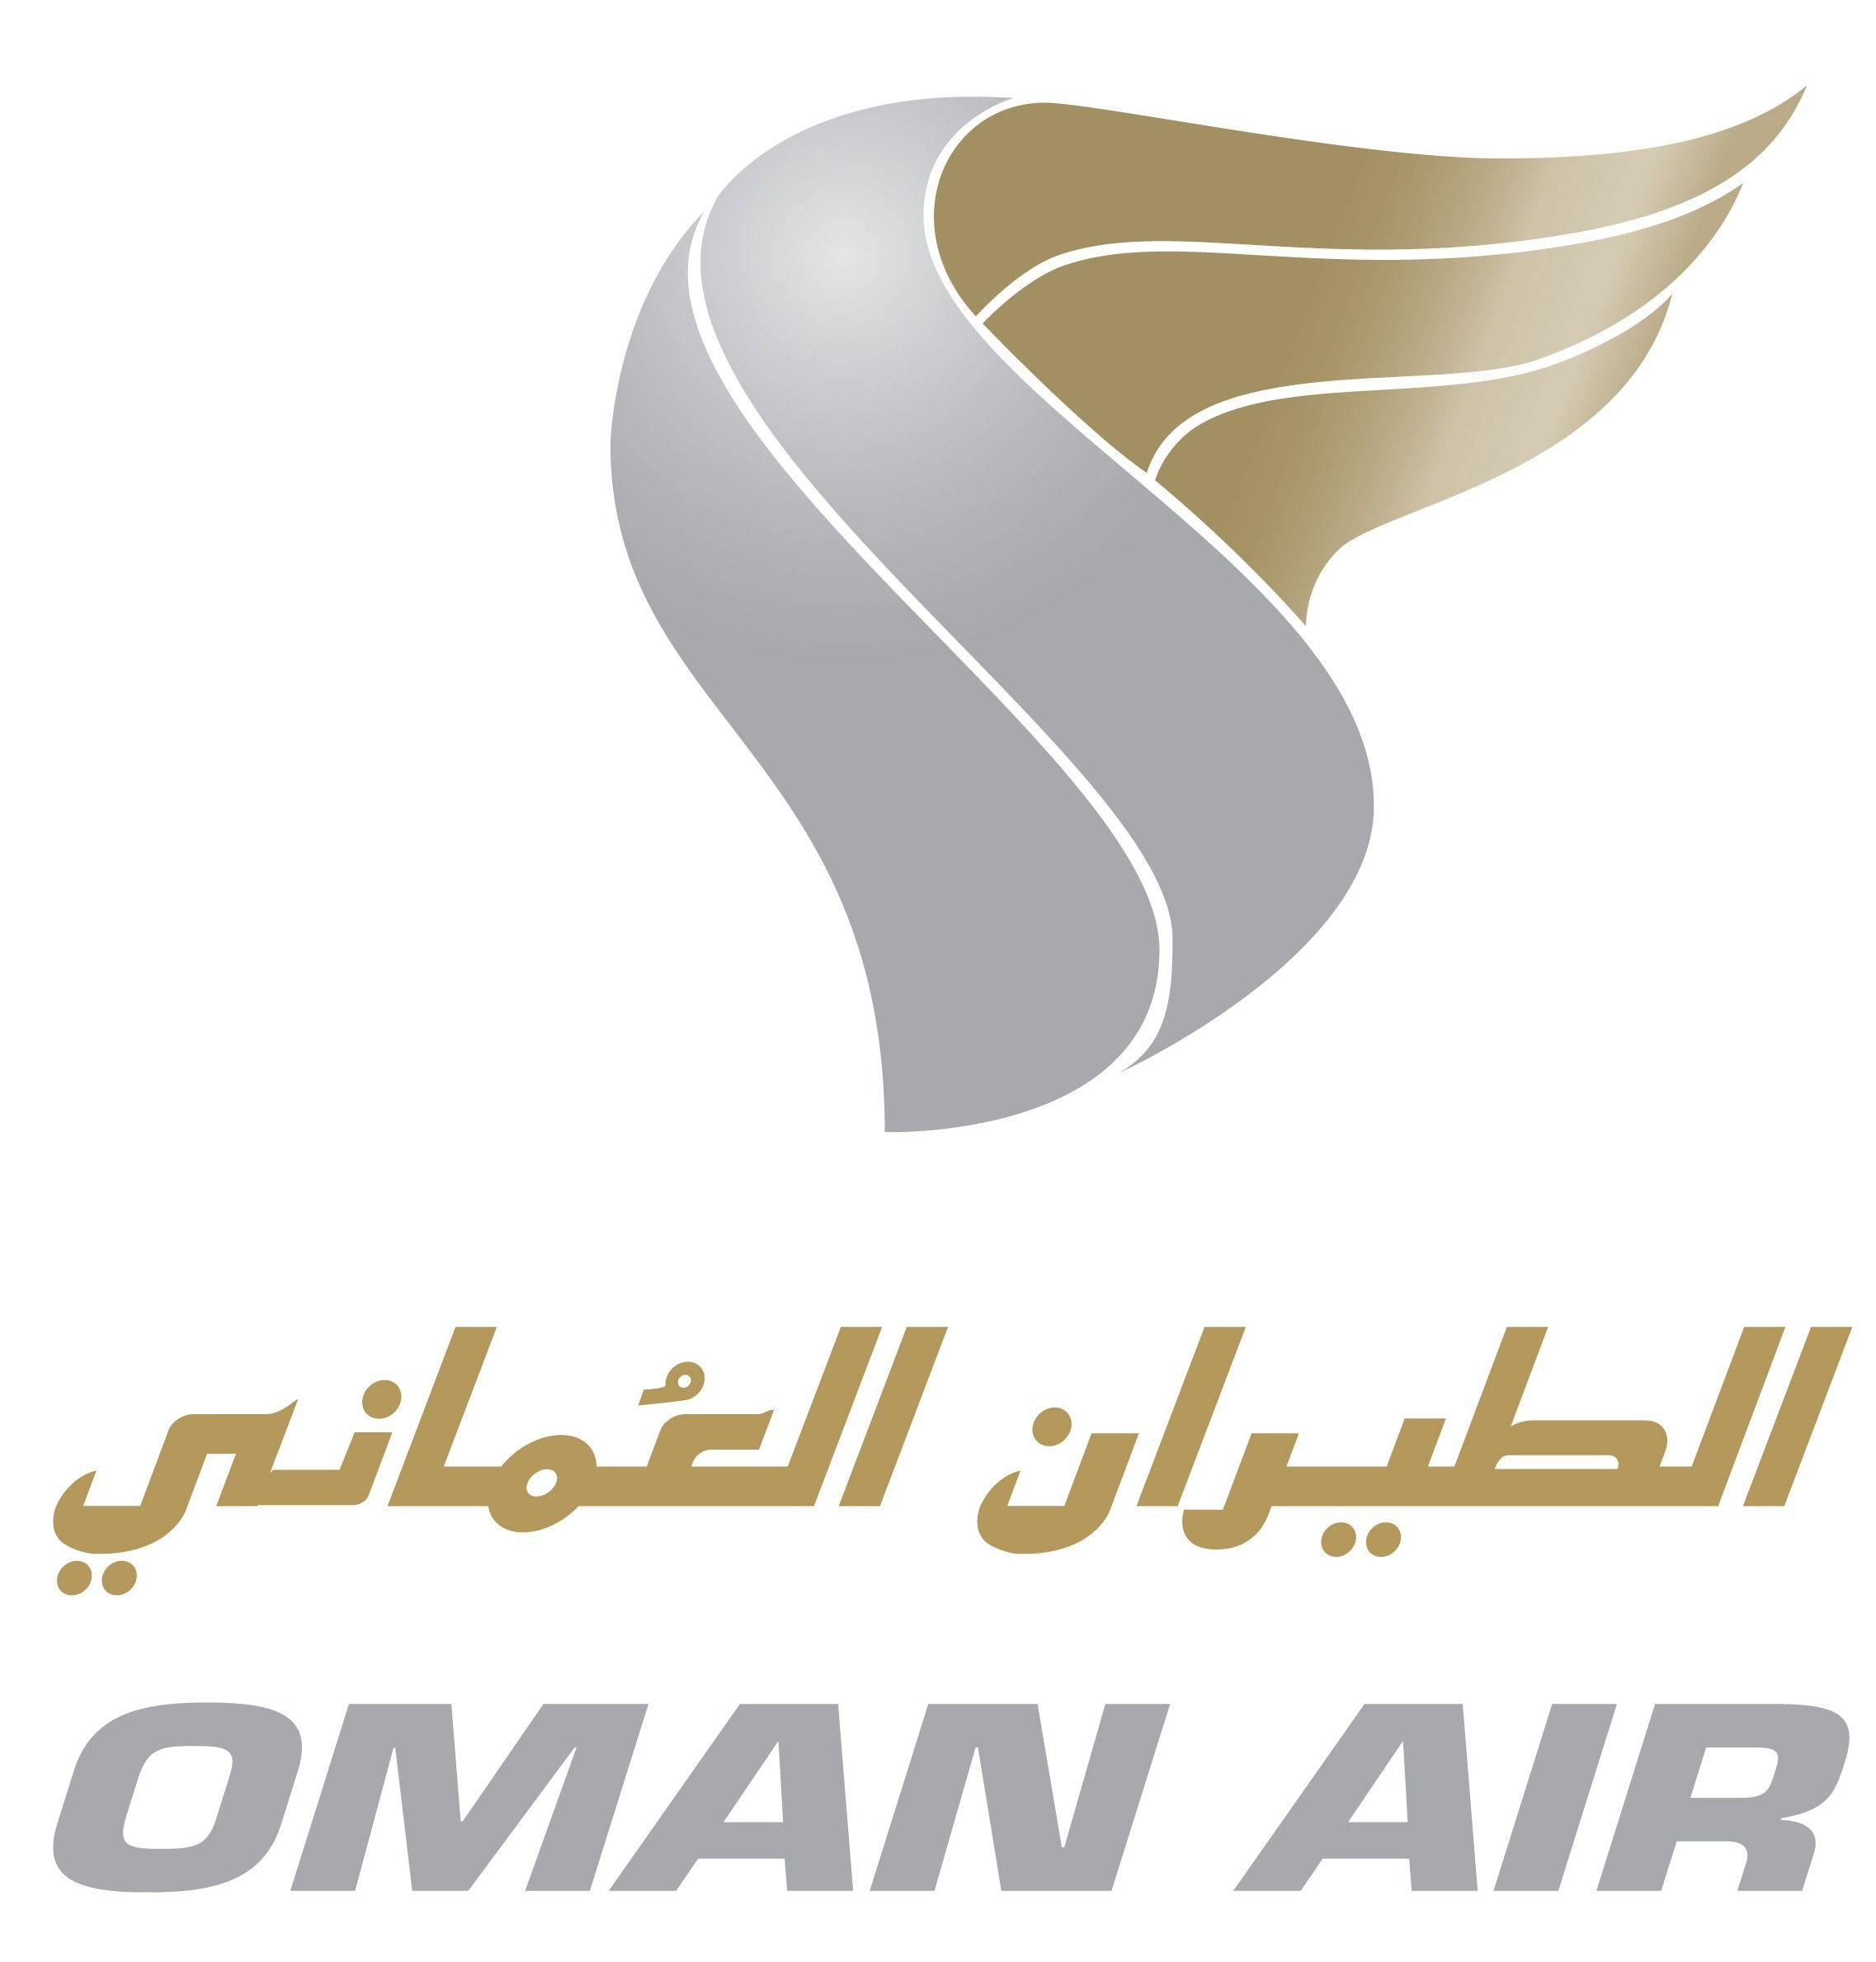 National Airlines Logo - Oman Air | National Airlines Logos | Airline logo, National airlines ...